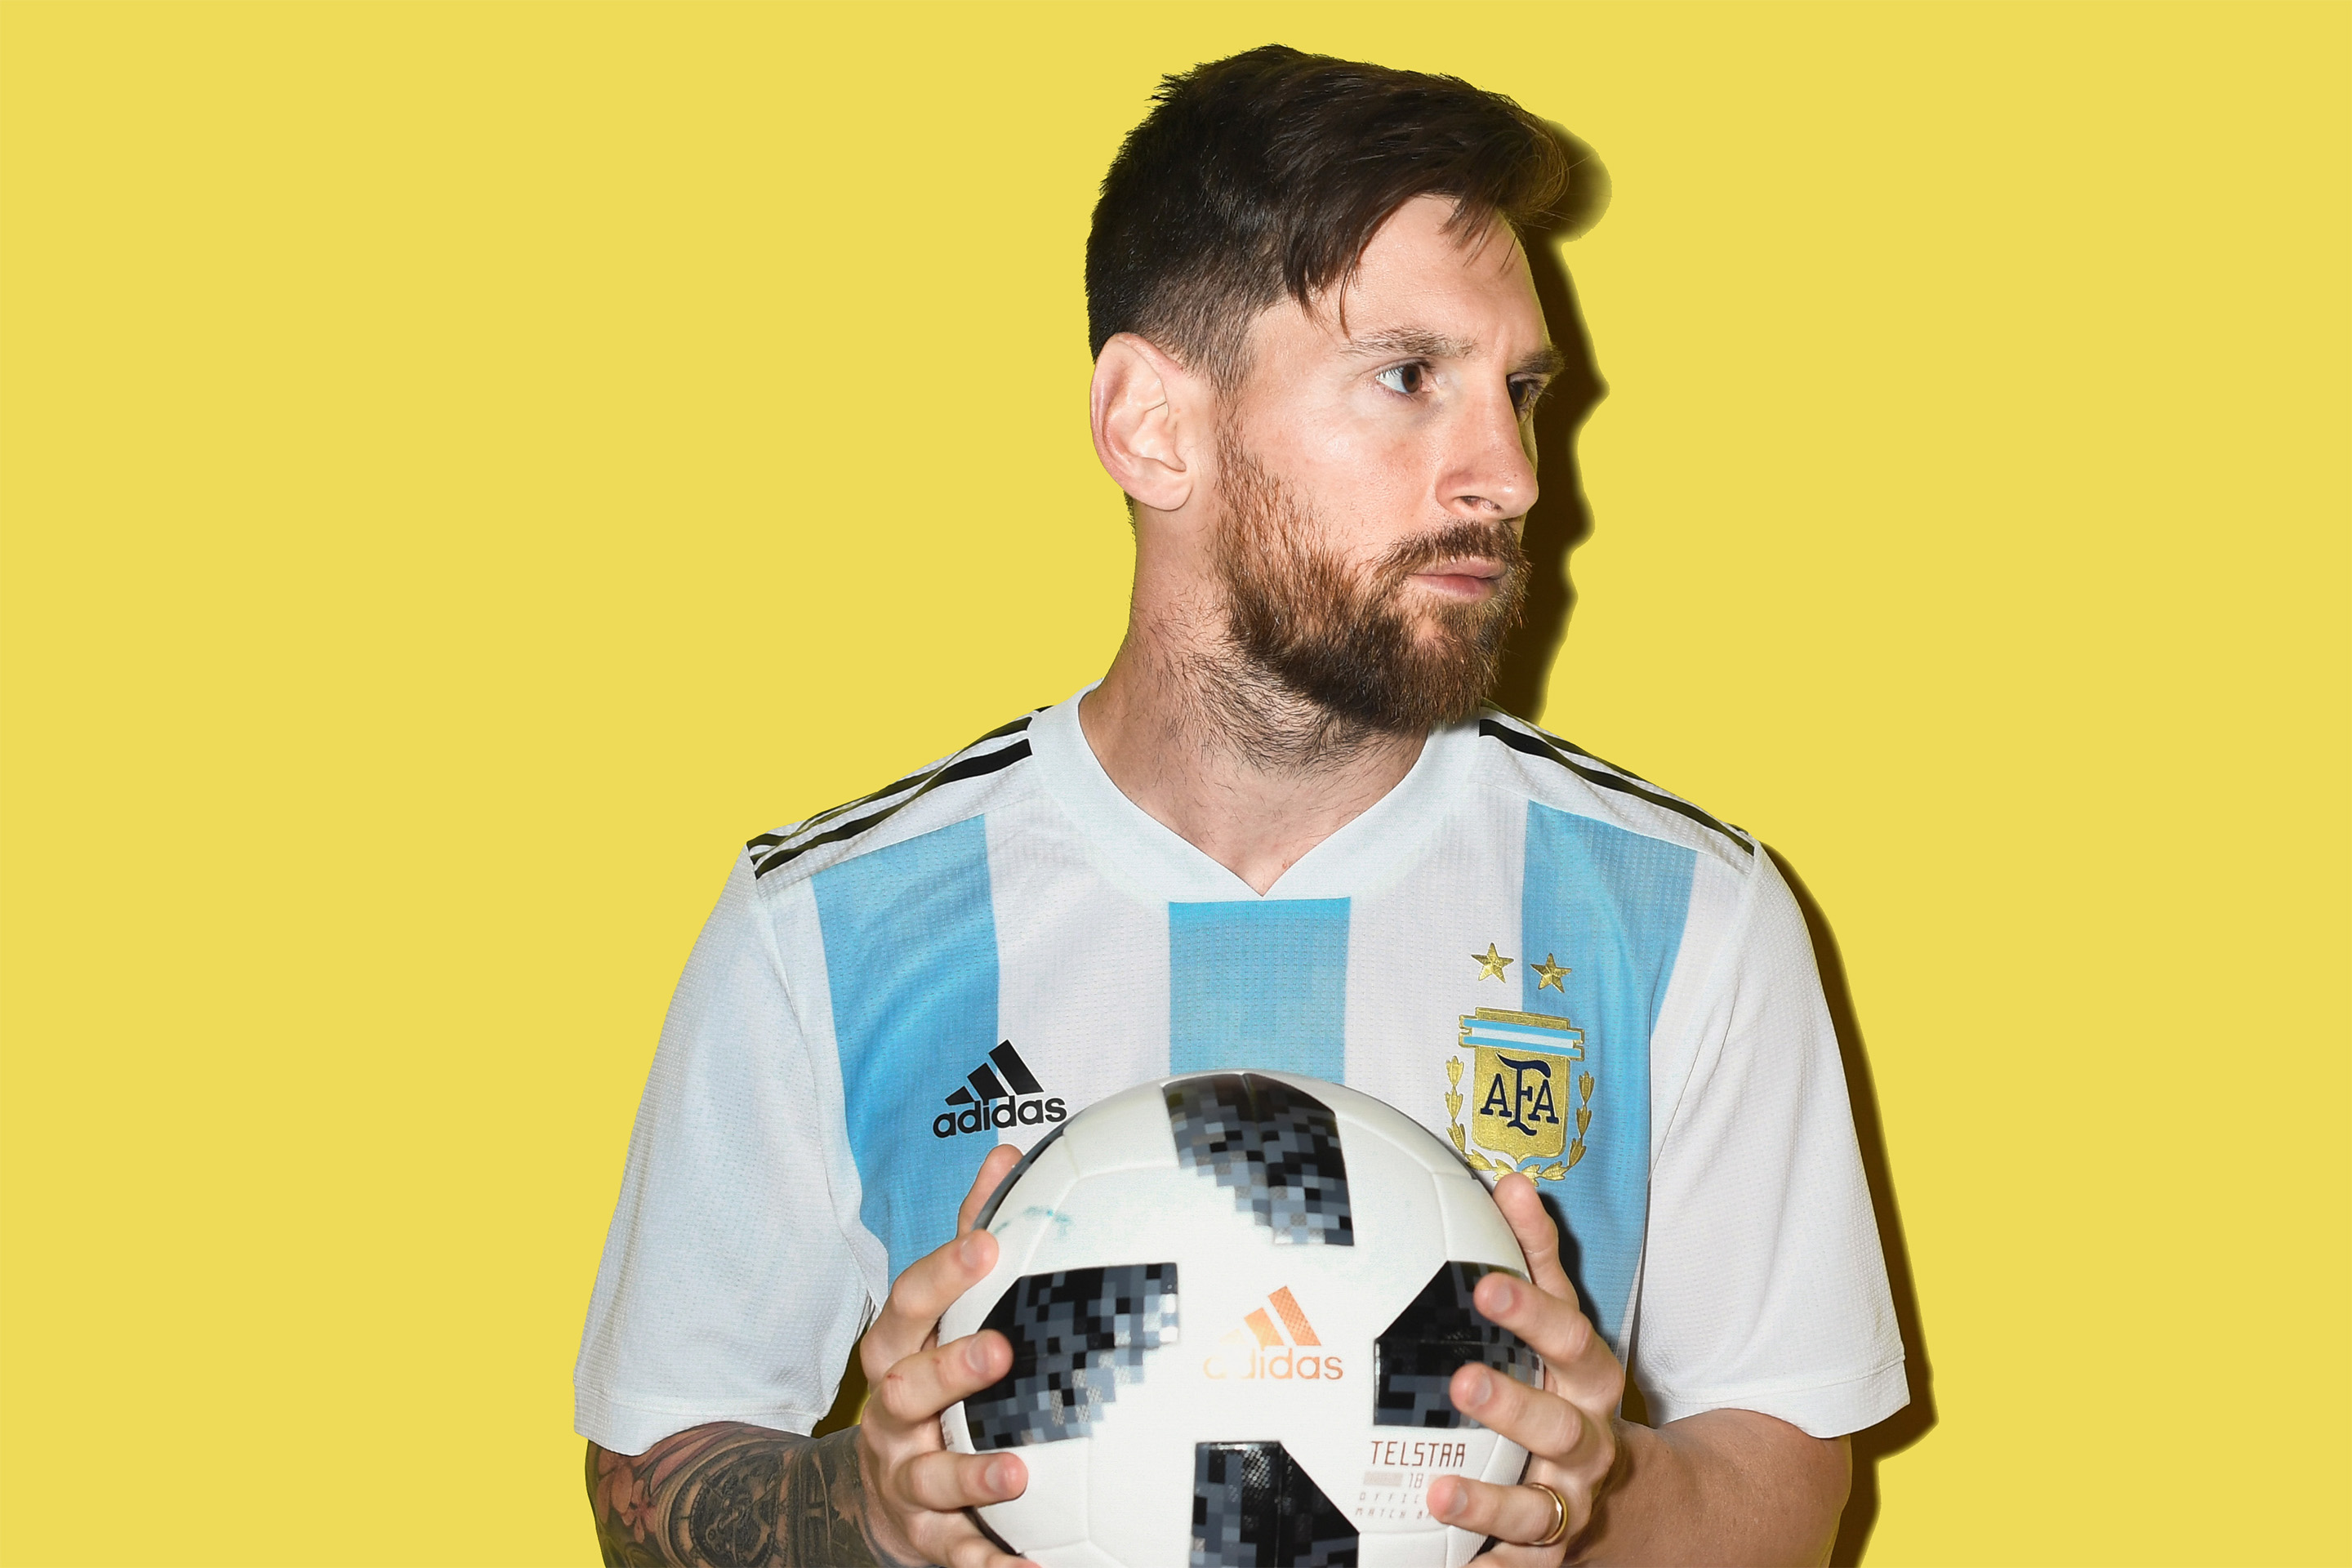 Lionel Messi Is the Highest-Paid Soccer Player in the World. Here's How He Makes and Spends His Millions